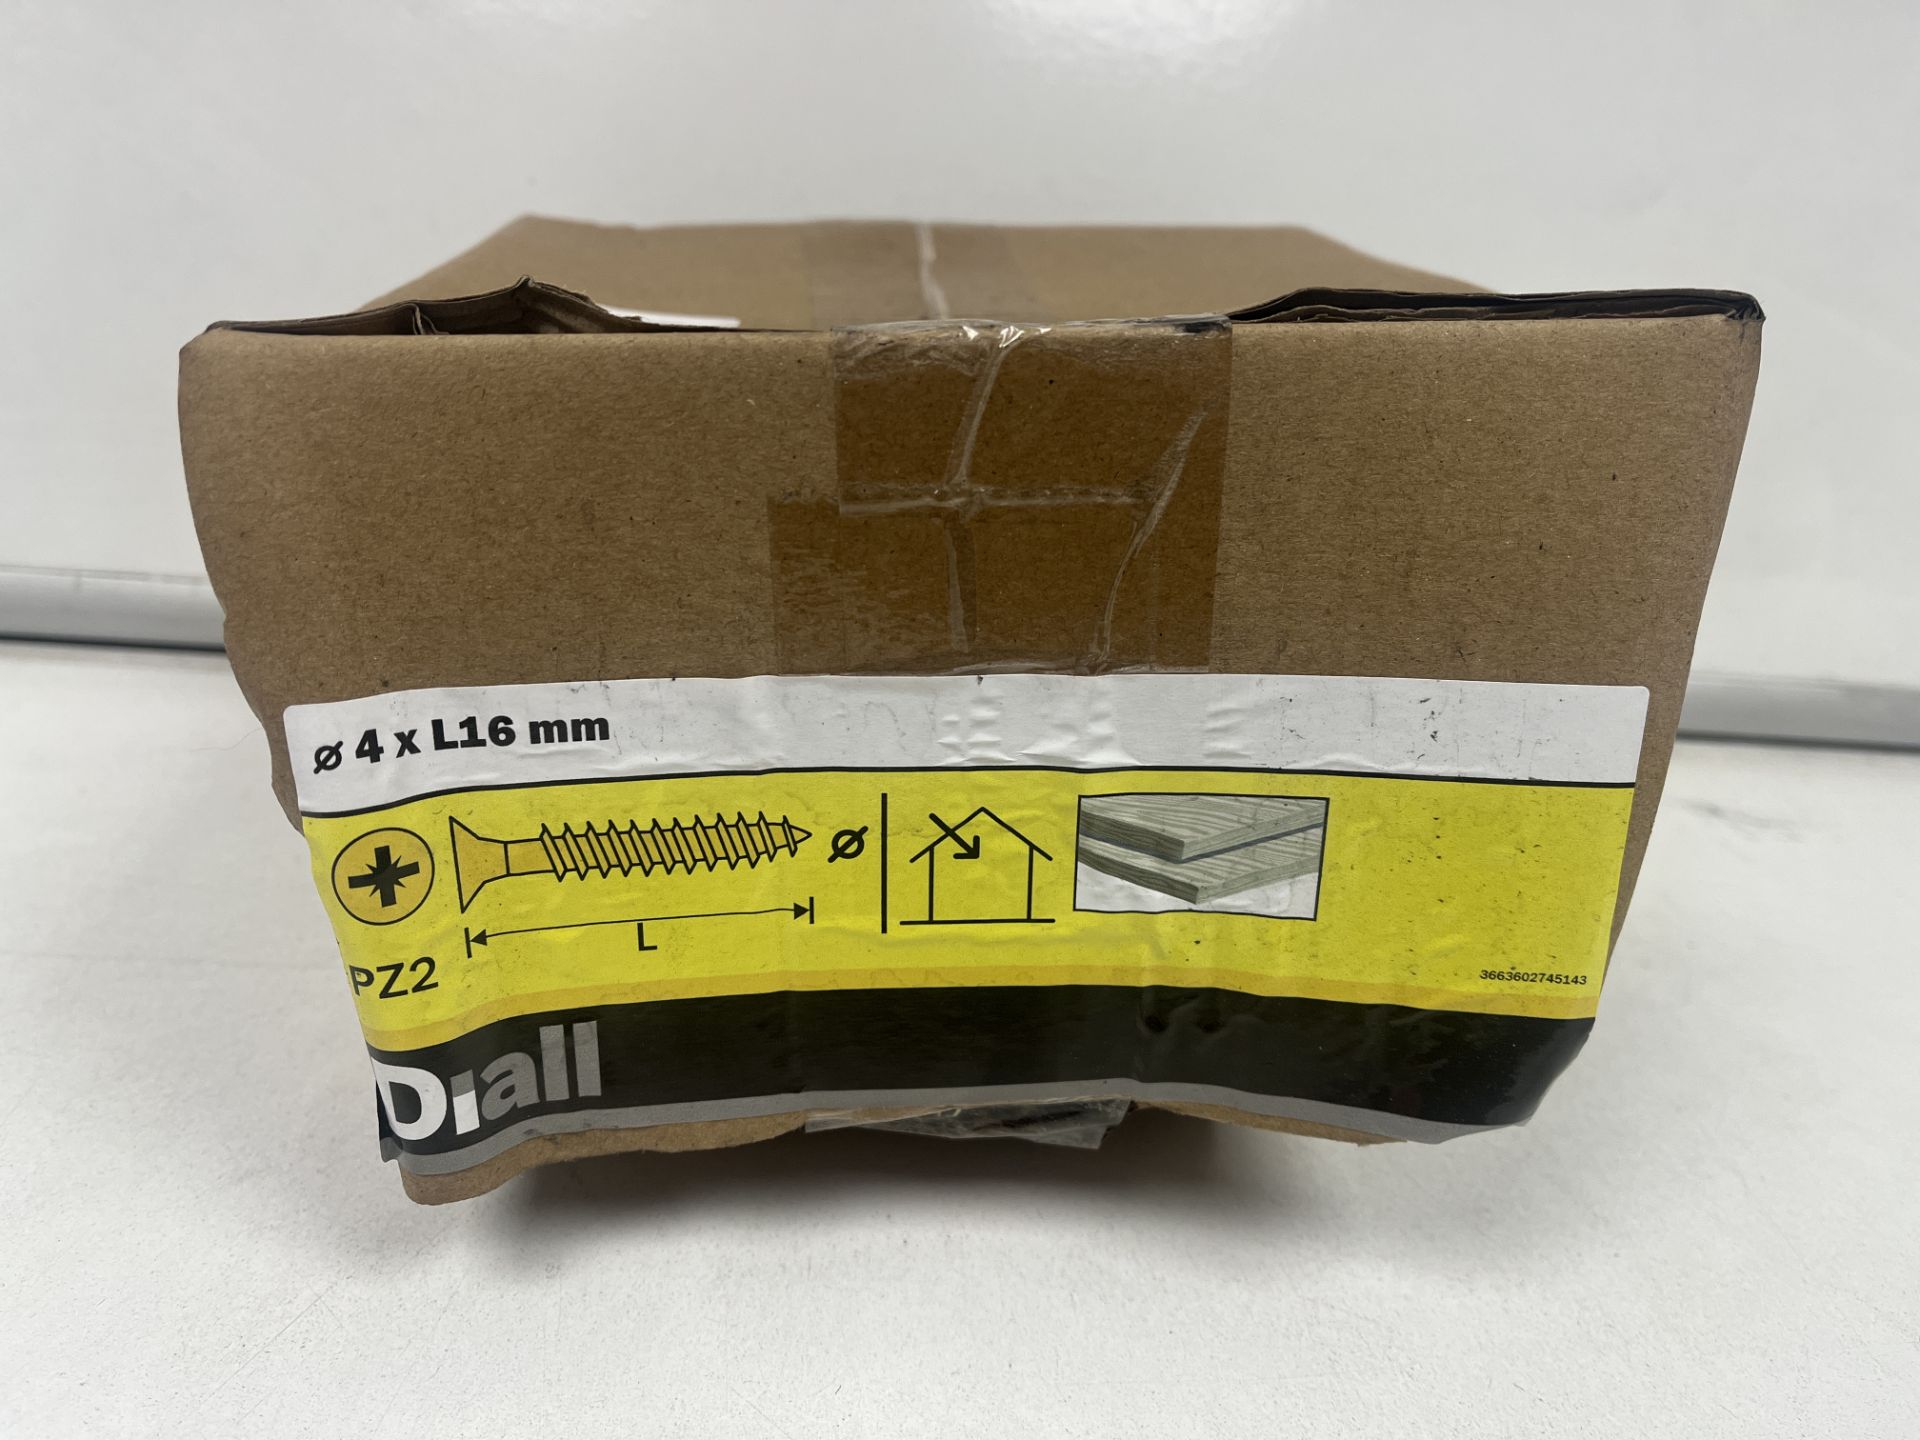 10 X BRAND NEW 4KG BOXES OF DIALL PZ2 4 X L16MM STEEL WOOD SCREWS (PLEASE NOTE SOME BOX DAMAGE) R9-